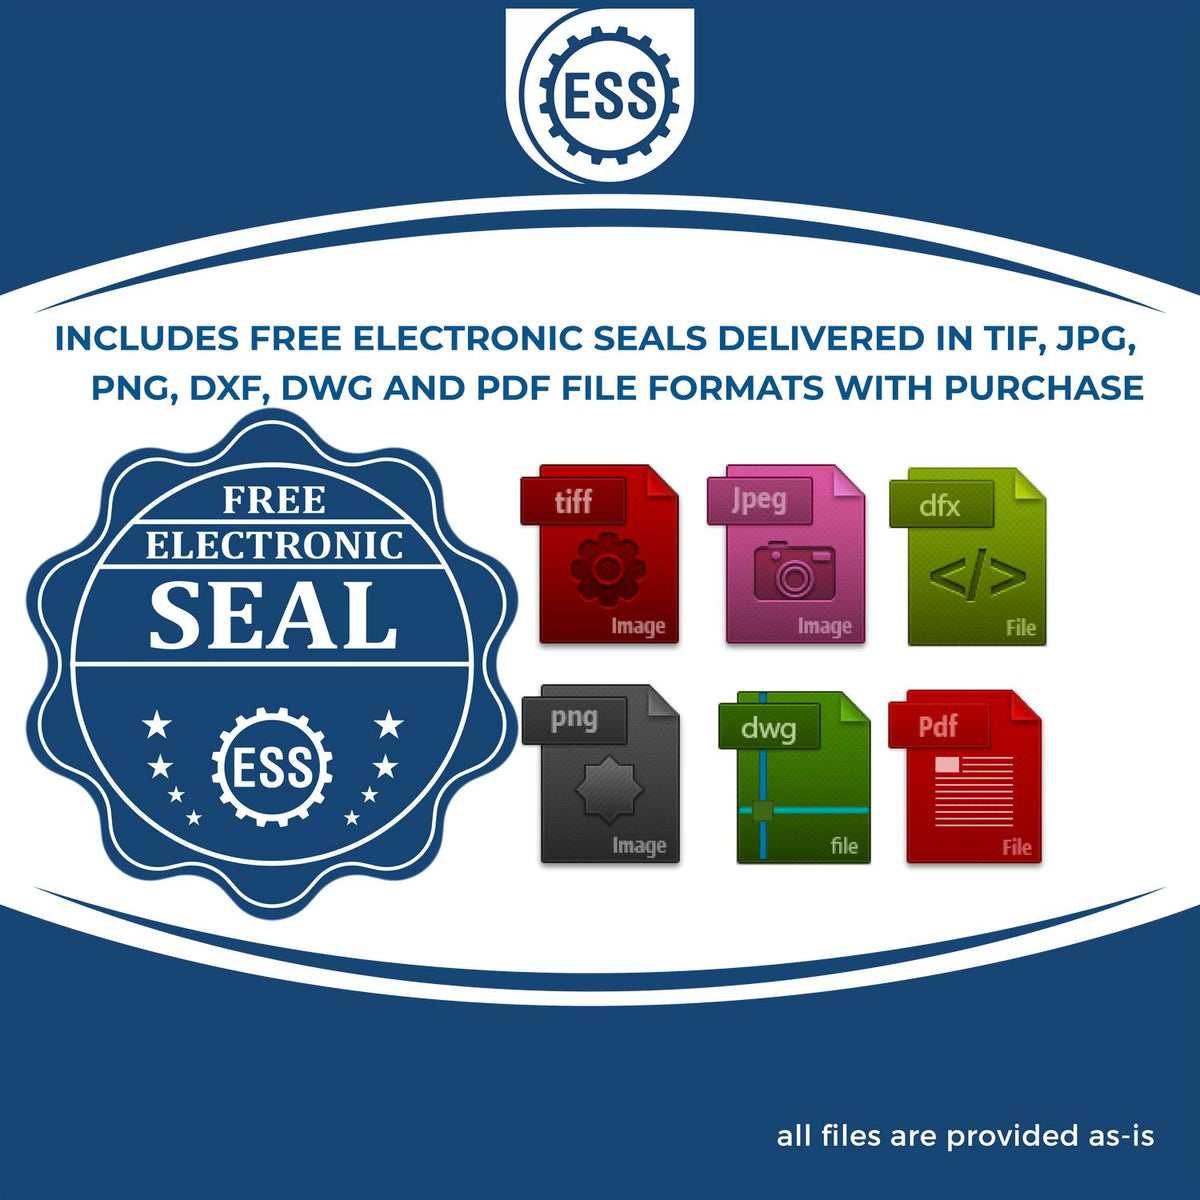 An infographic for the free electronic seal for the Slim Pre-Inked Rectangular Notary Stamp for Georgia illustrating the different file type icons such as DXF, DWG, TIF, JPG and PNG.